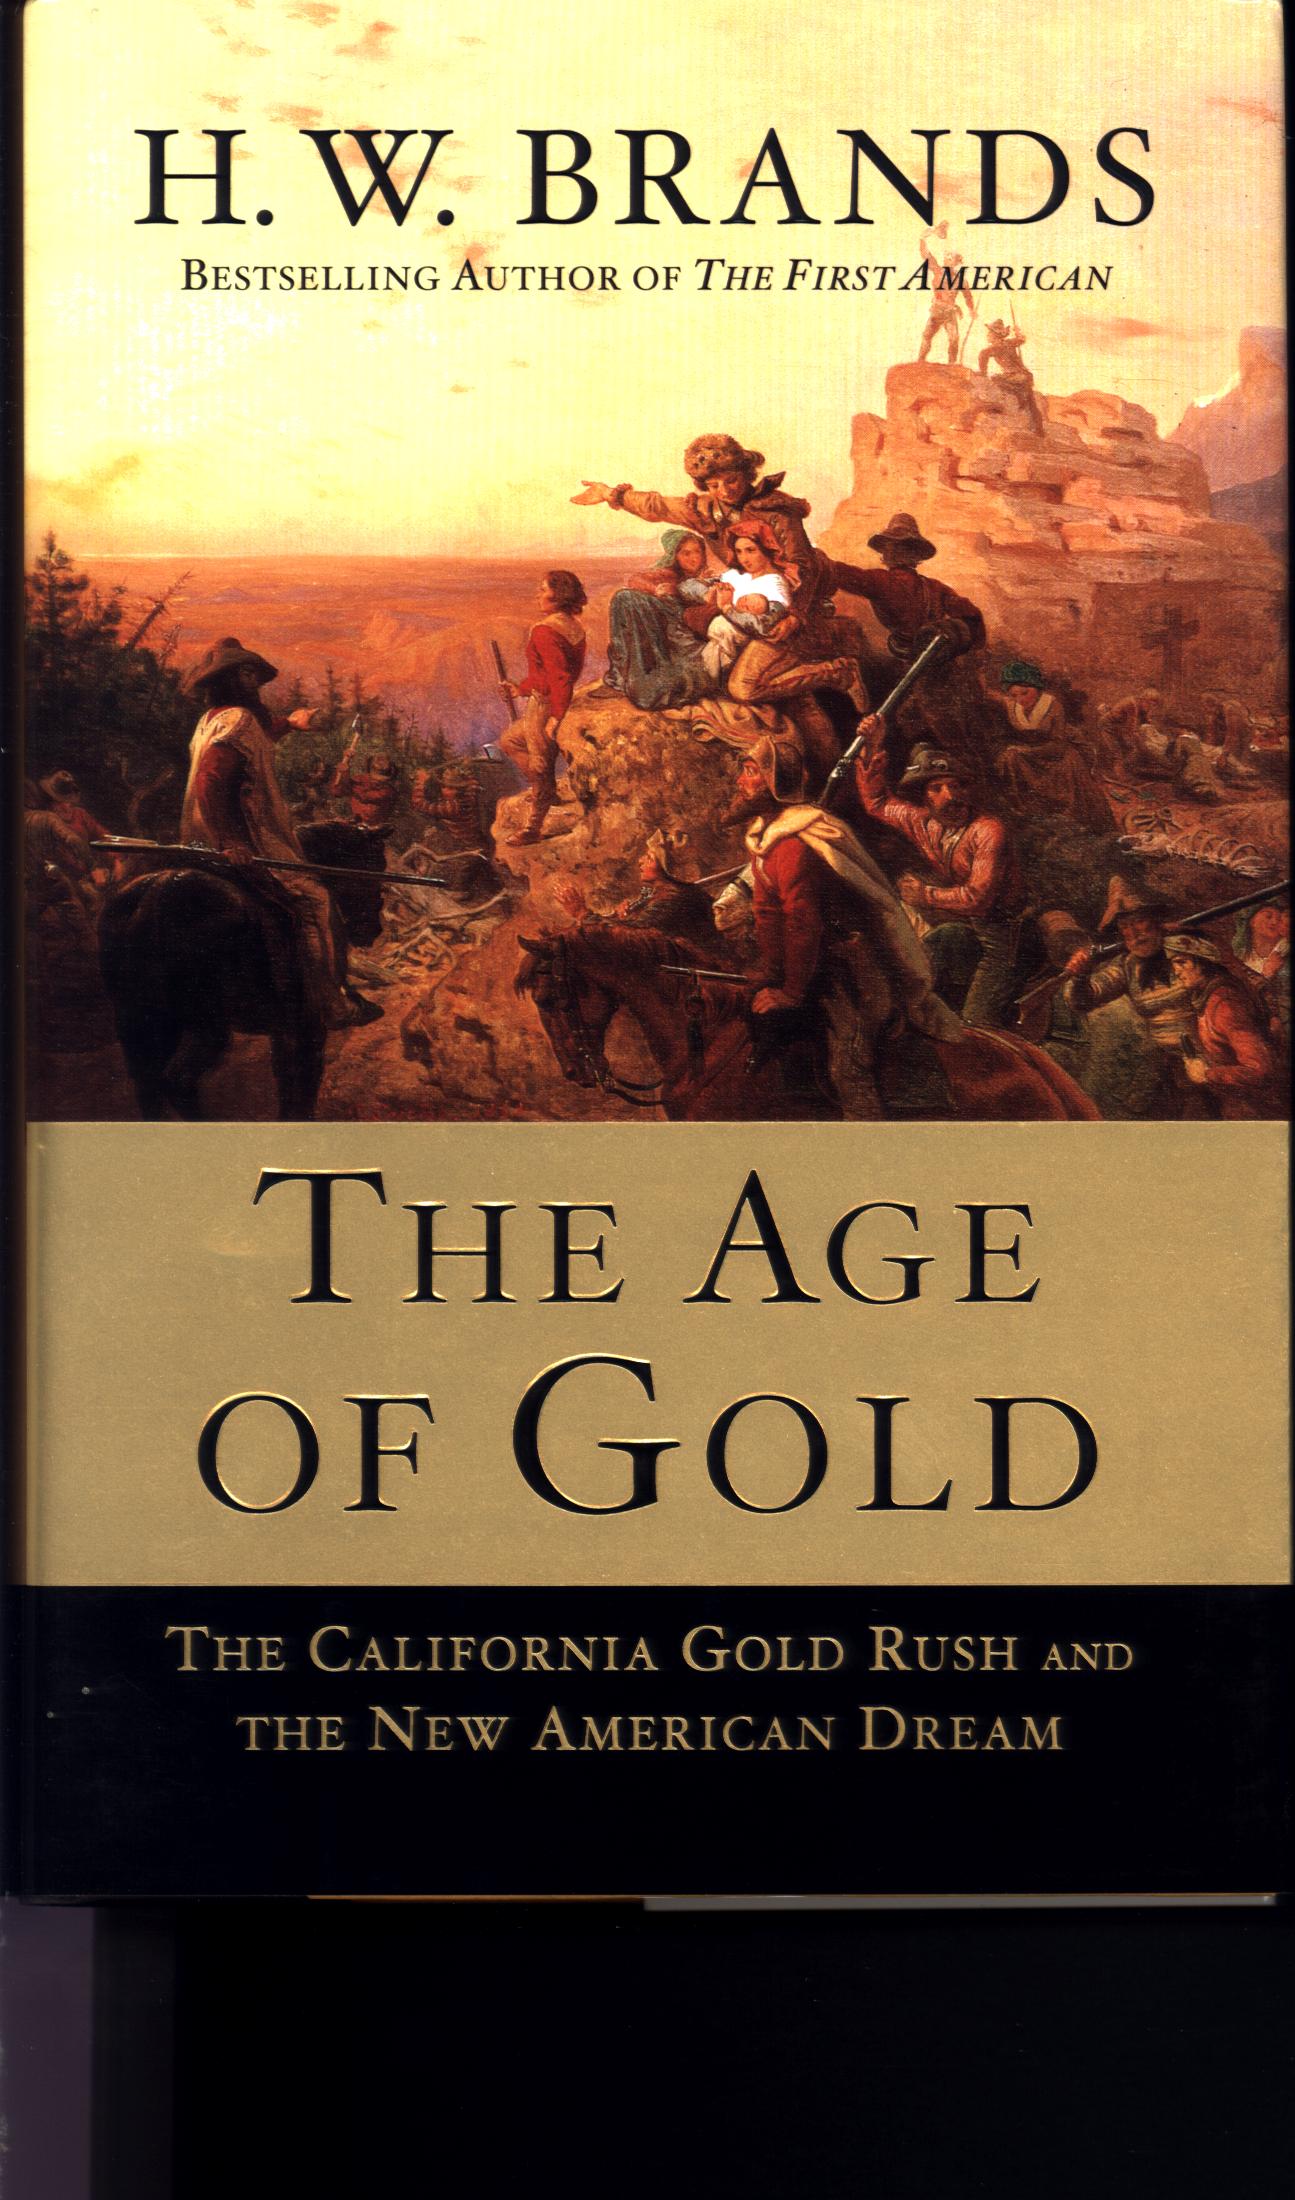 THE AGE OF GOLD: the California gold rush and the new American dream. by H. W. Brands.